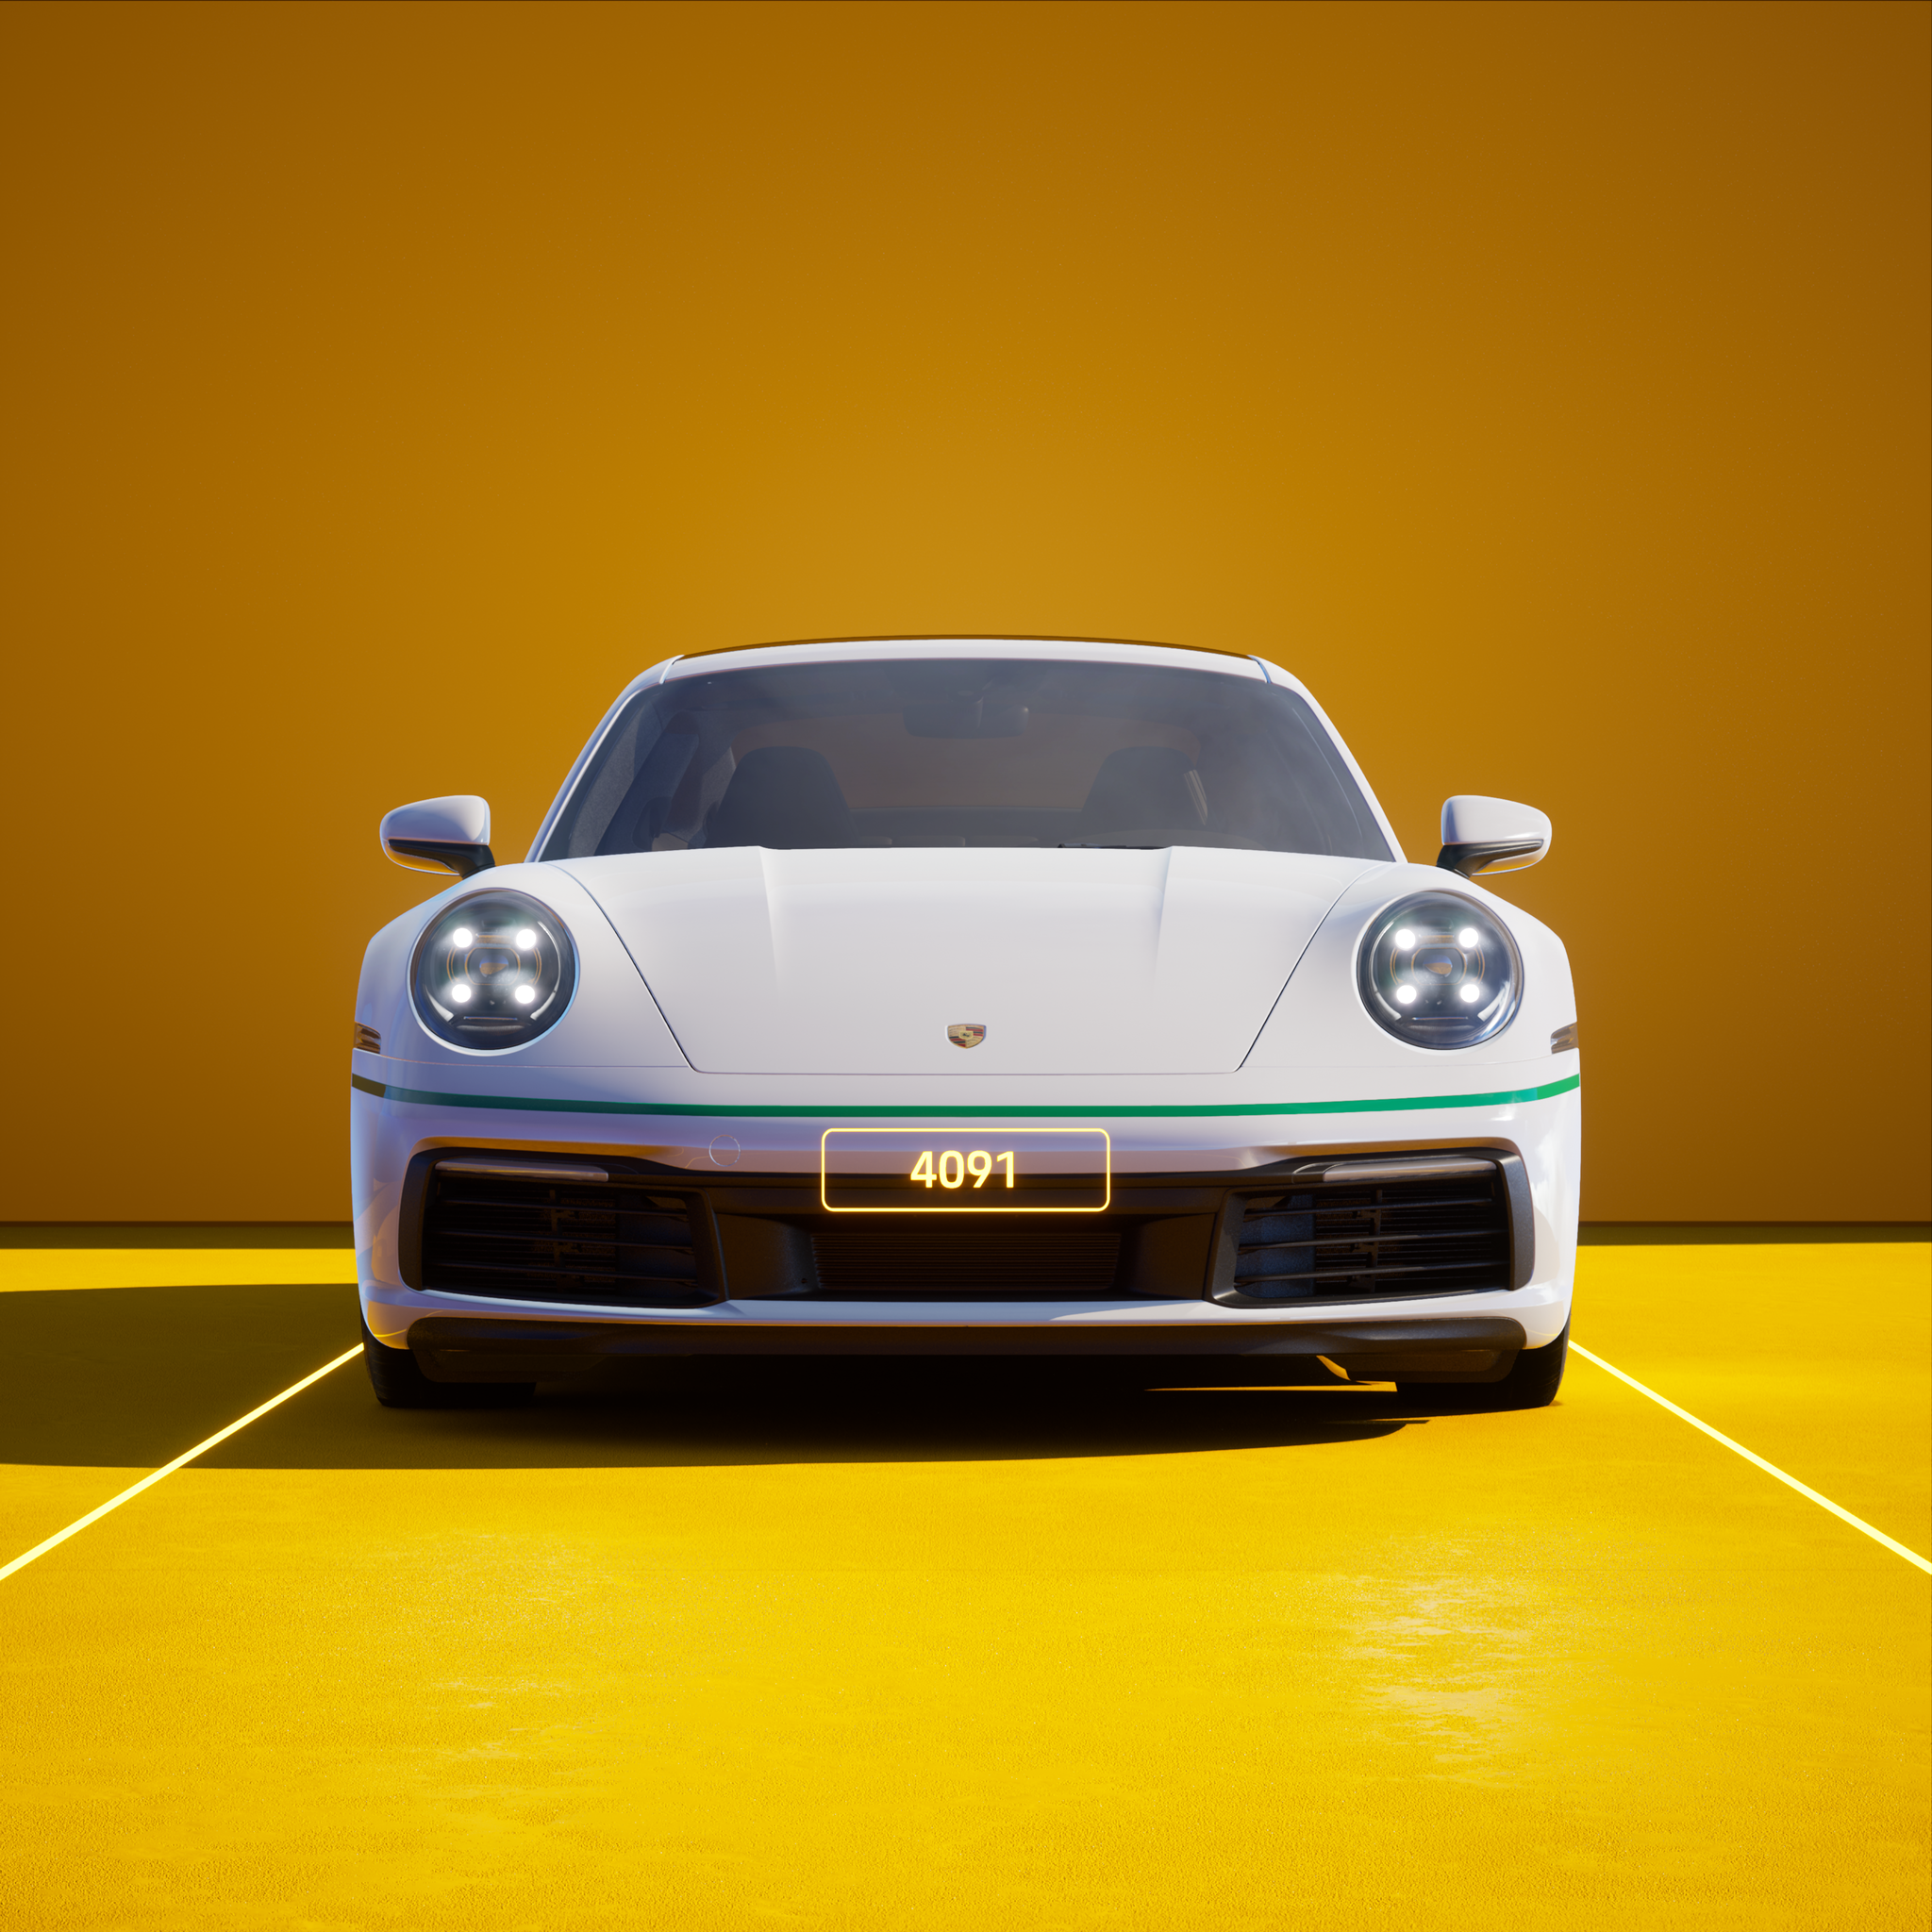 The PORSCHΞ 911 4091 image in phase